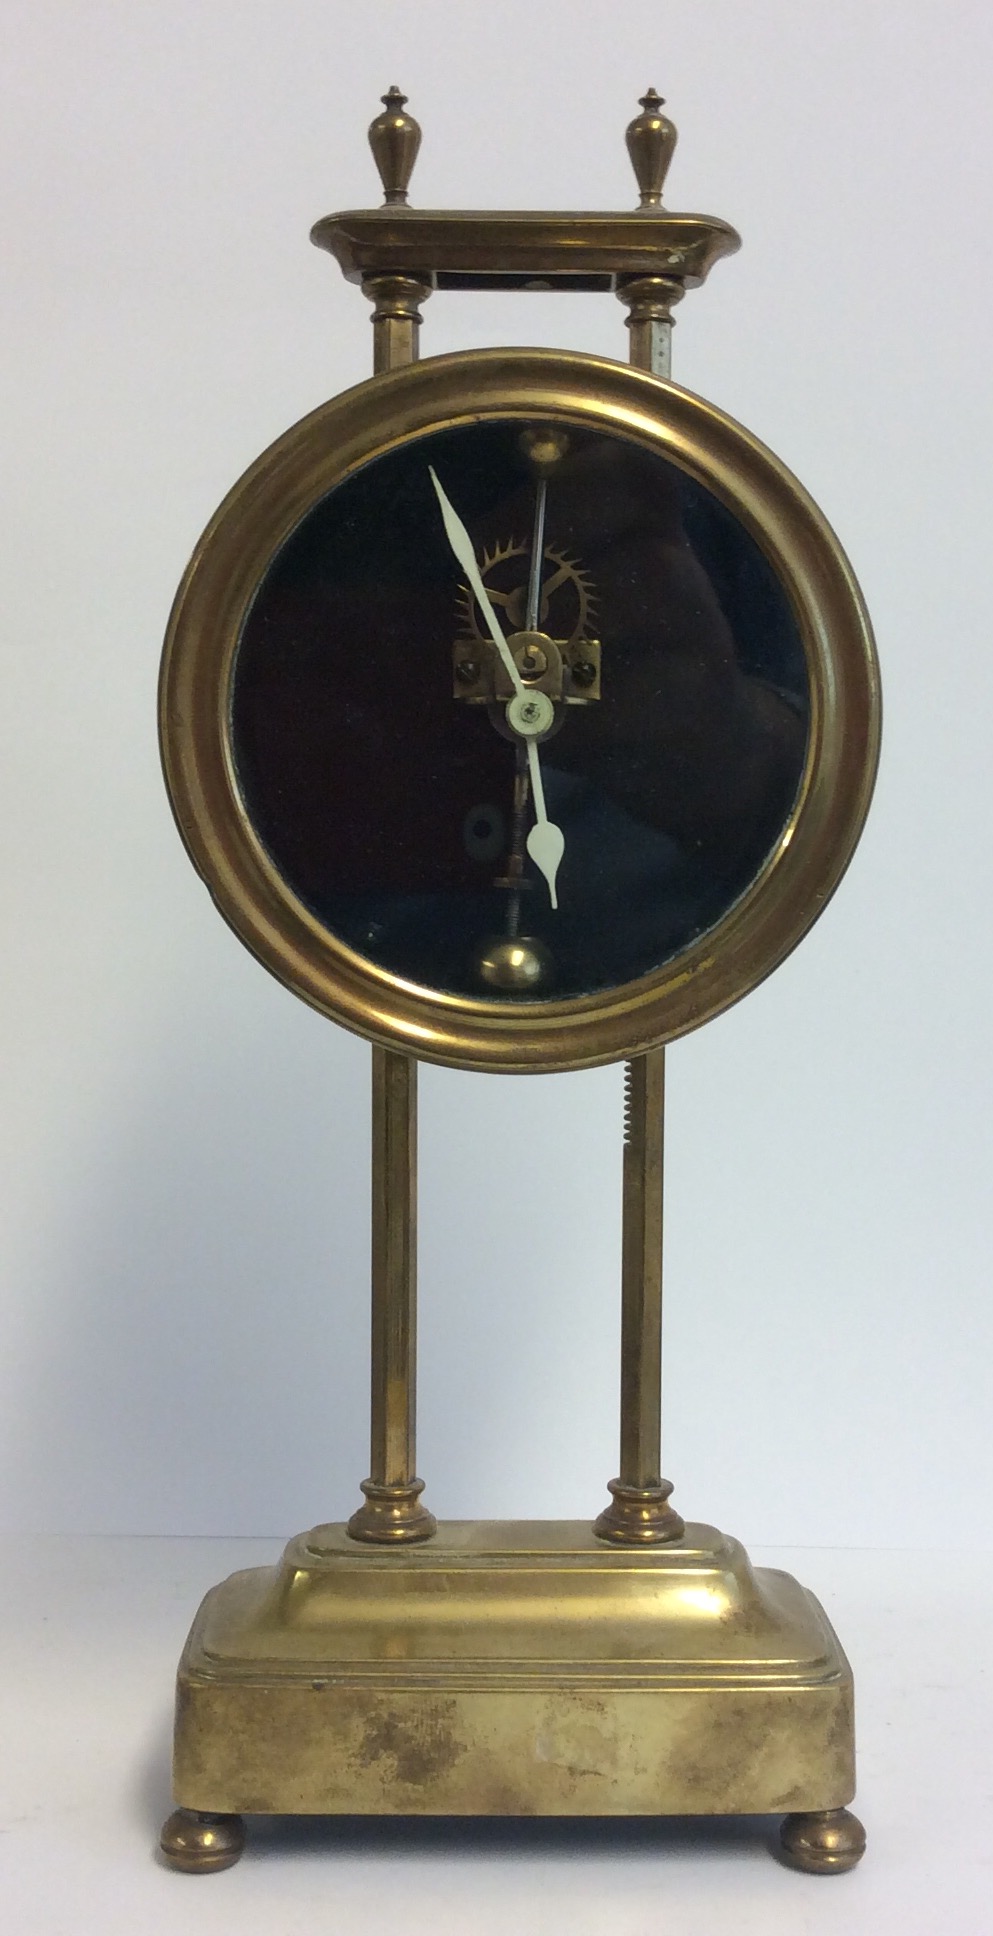 AN EARLY 20TH CENTURY BRASS GRAVITY CLOCK The circular dial with visual escapement, the frame marked